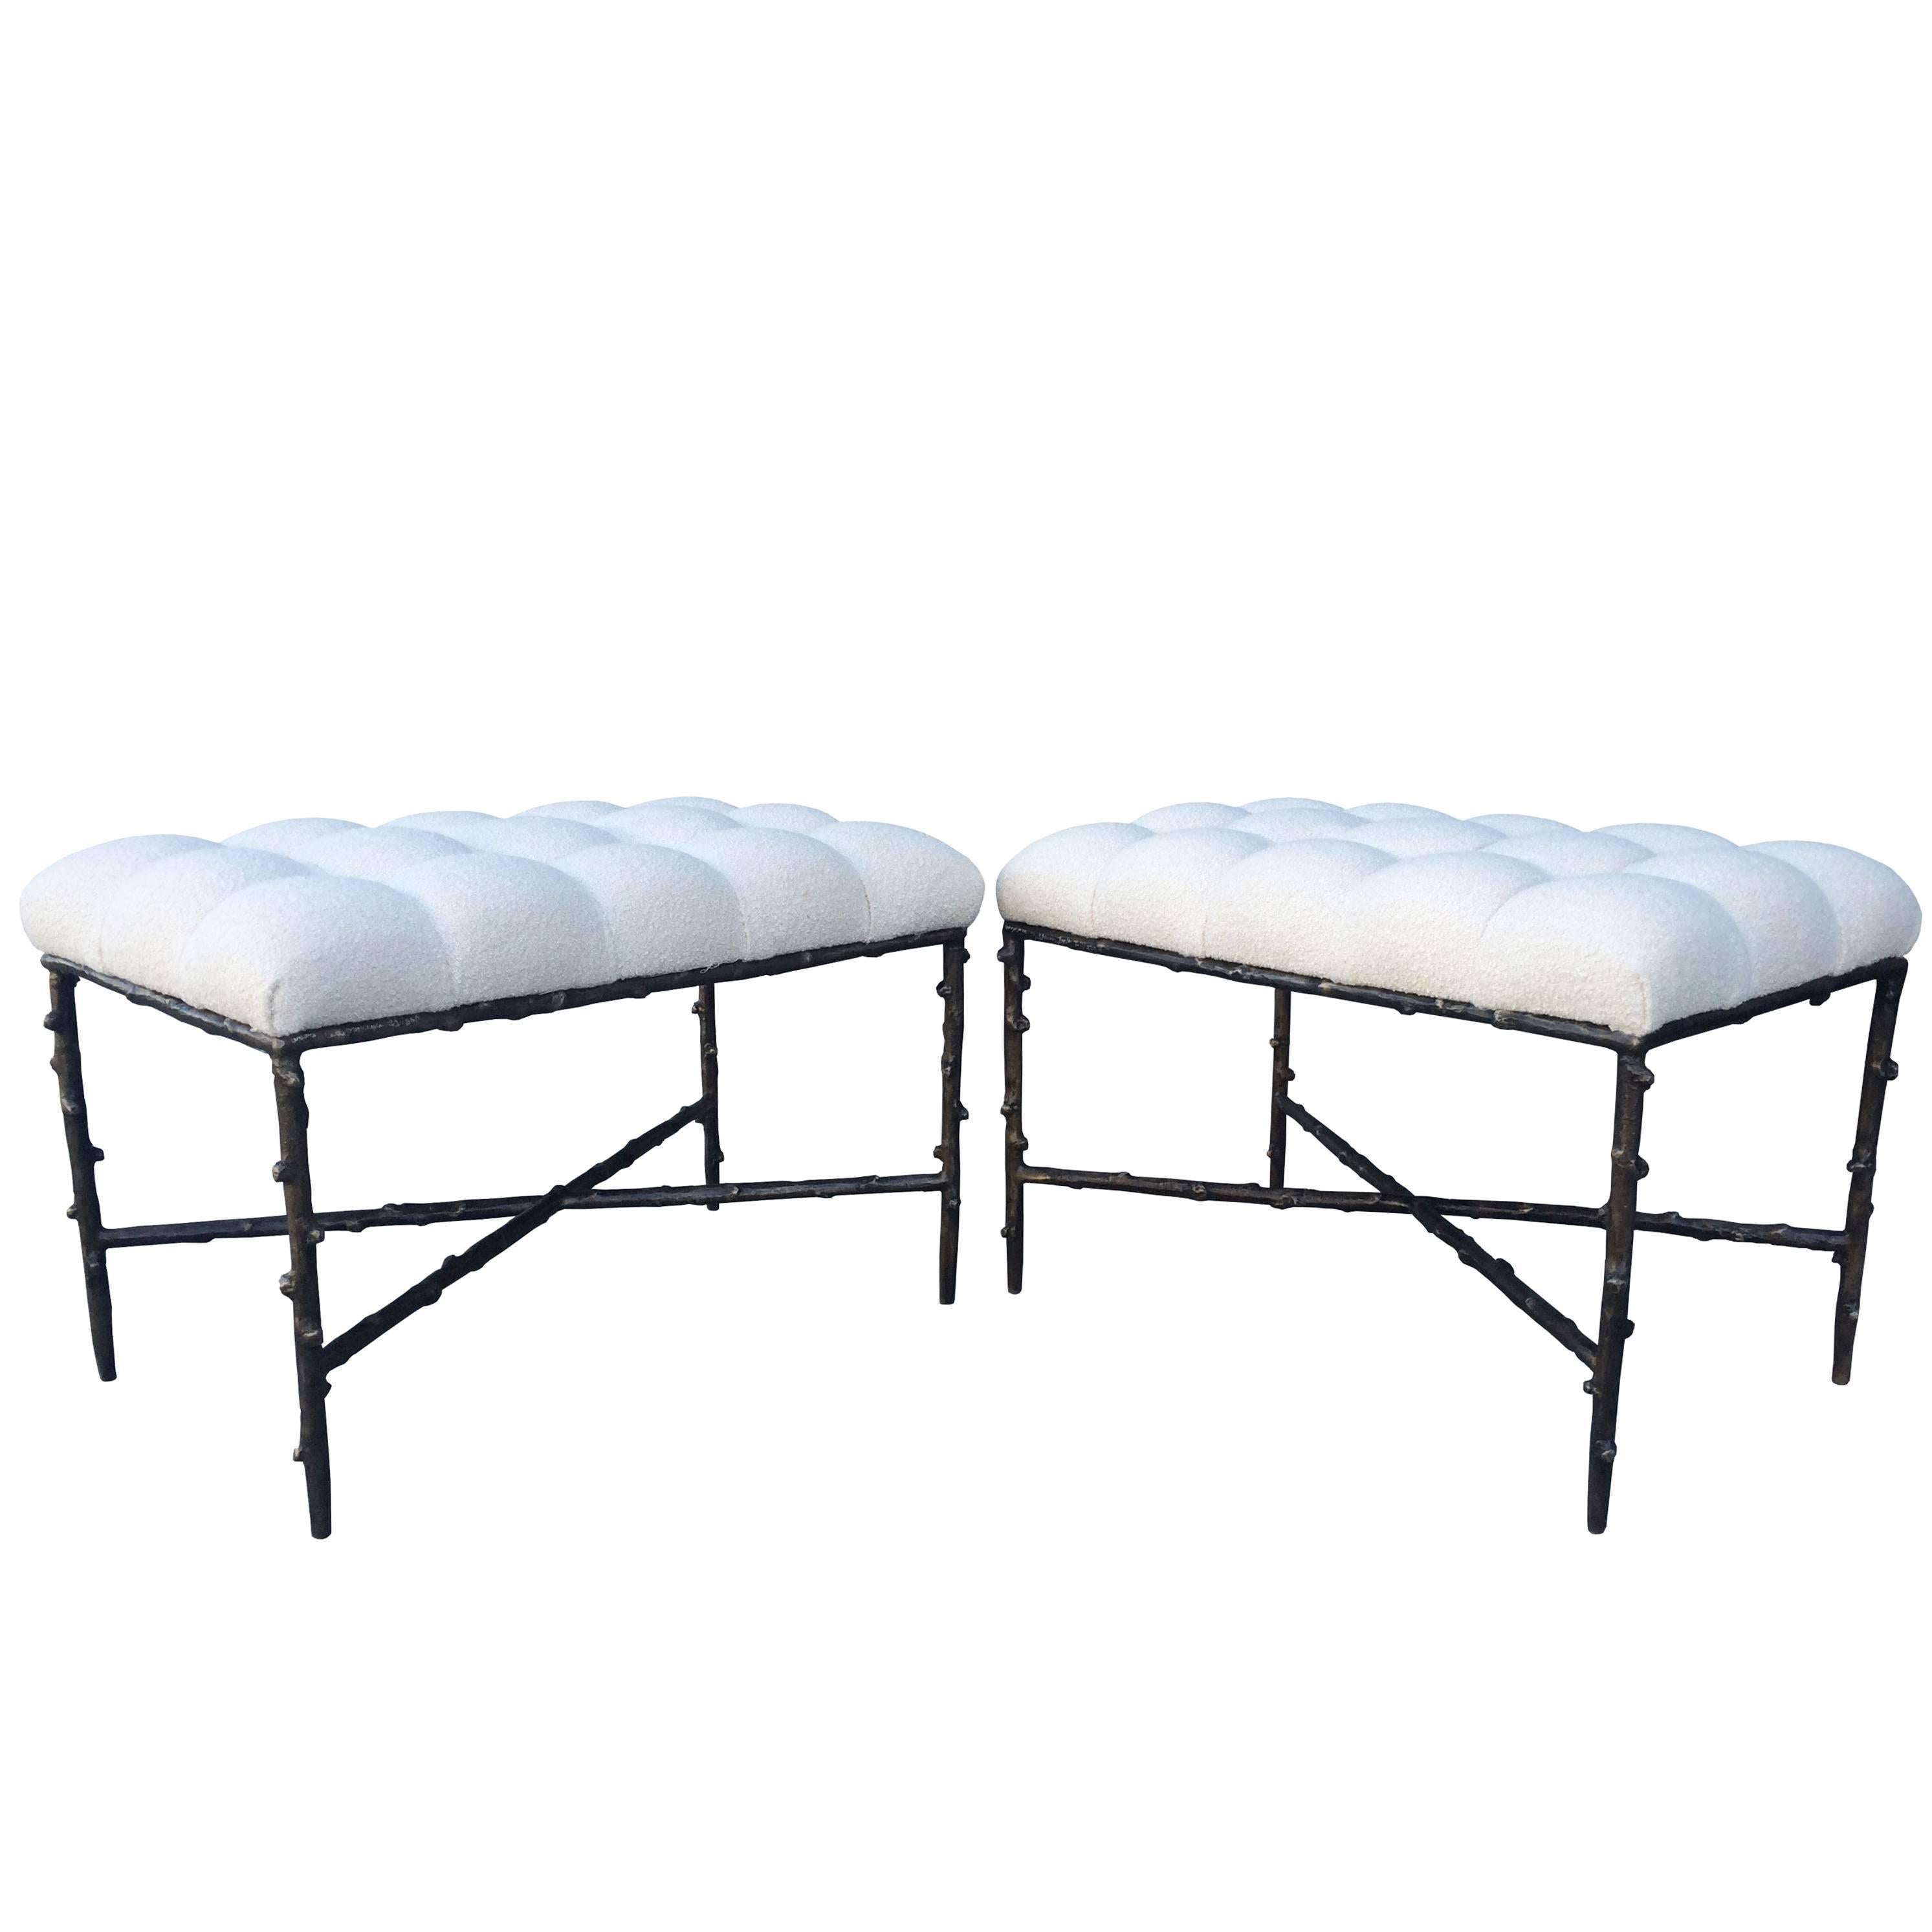 Solid Bronze Benches with Tufted Seats, Limited Edition of 200, Numbers 1 and 2 For Sale